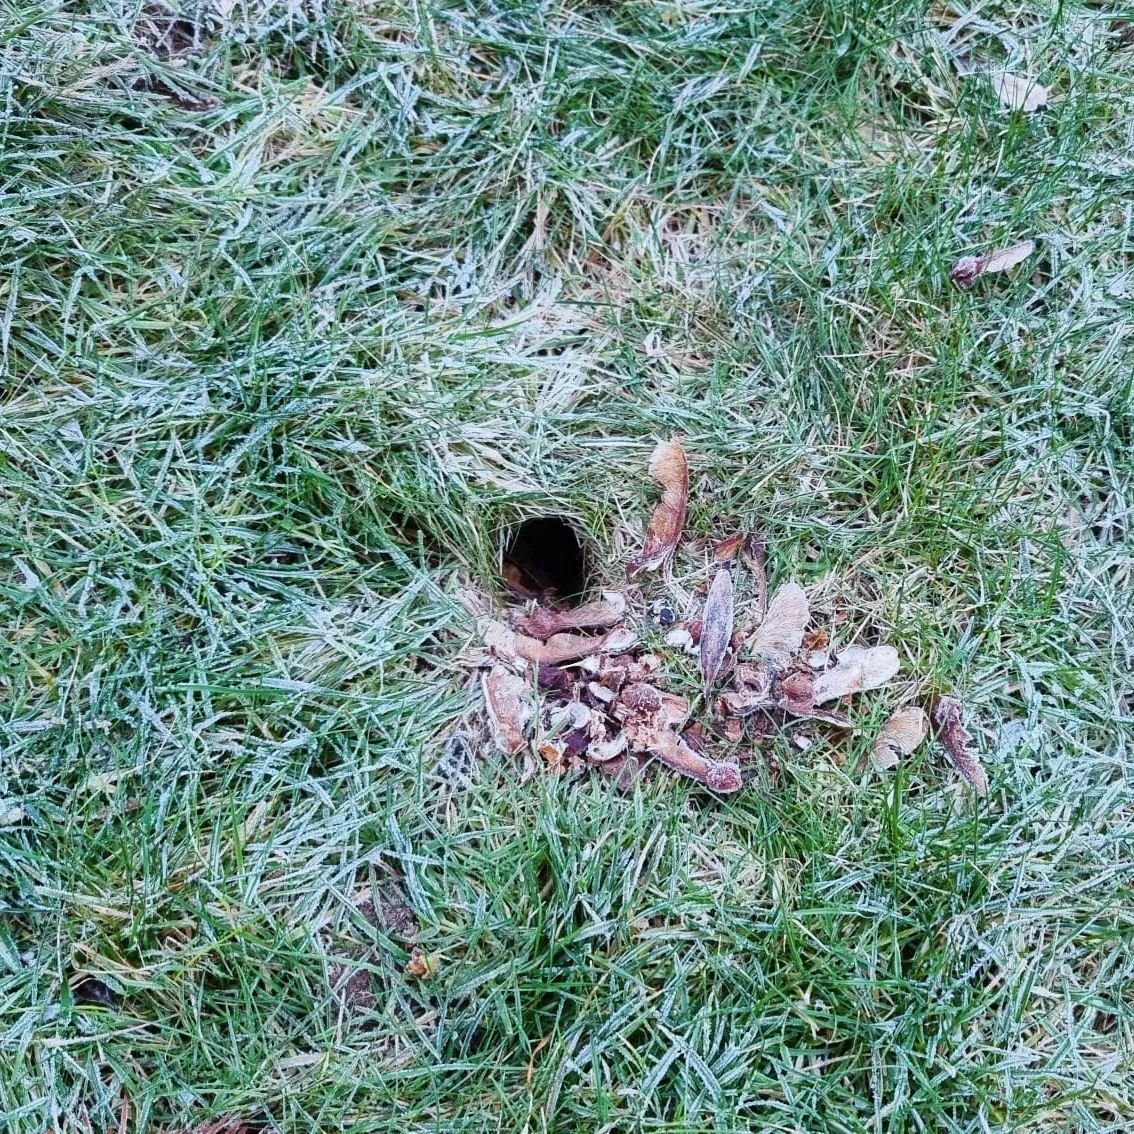 Glad to see the resident voles aren't going hungry